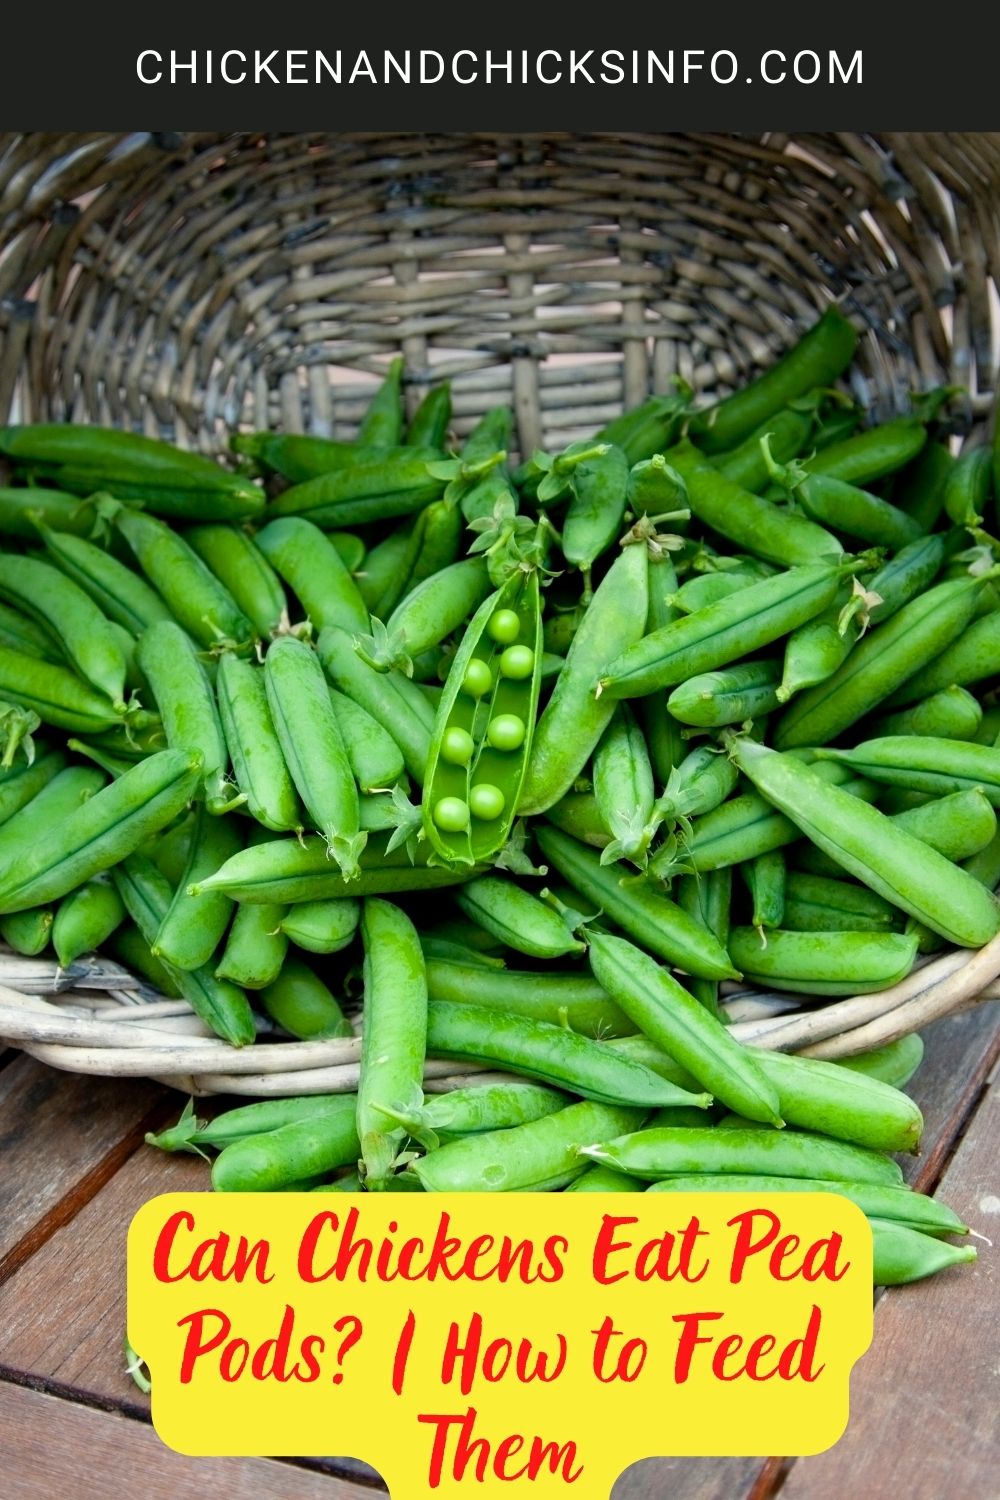 Can Chickens Eat Pea Pods? | How to Feed Them poster.
